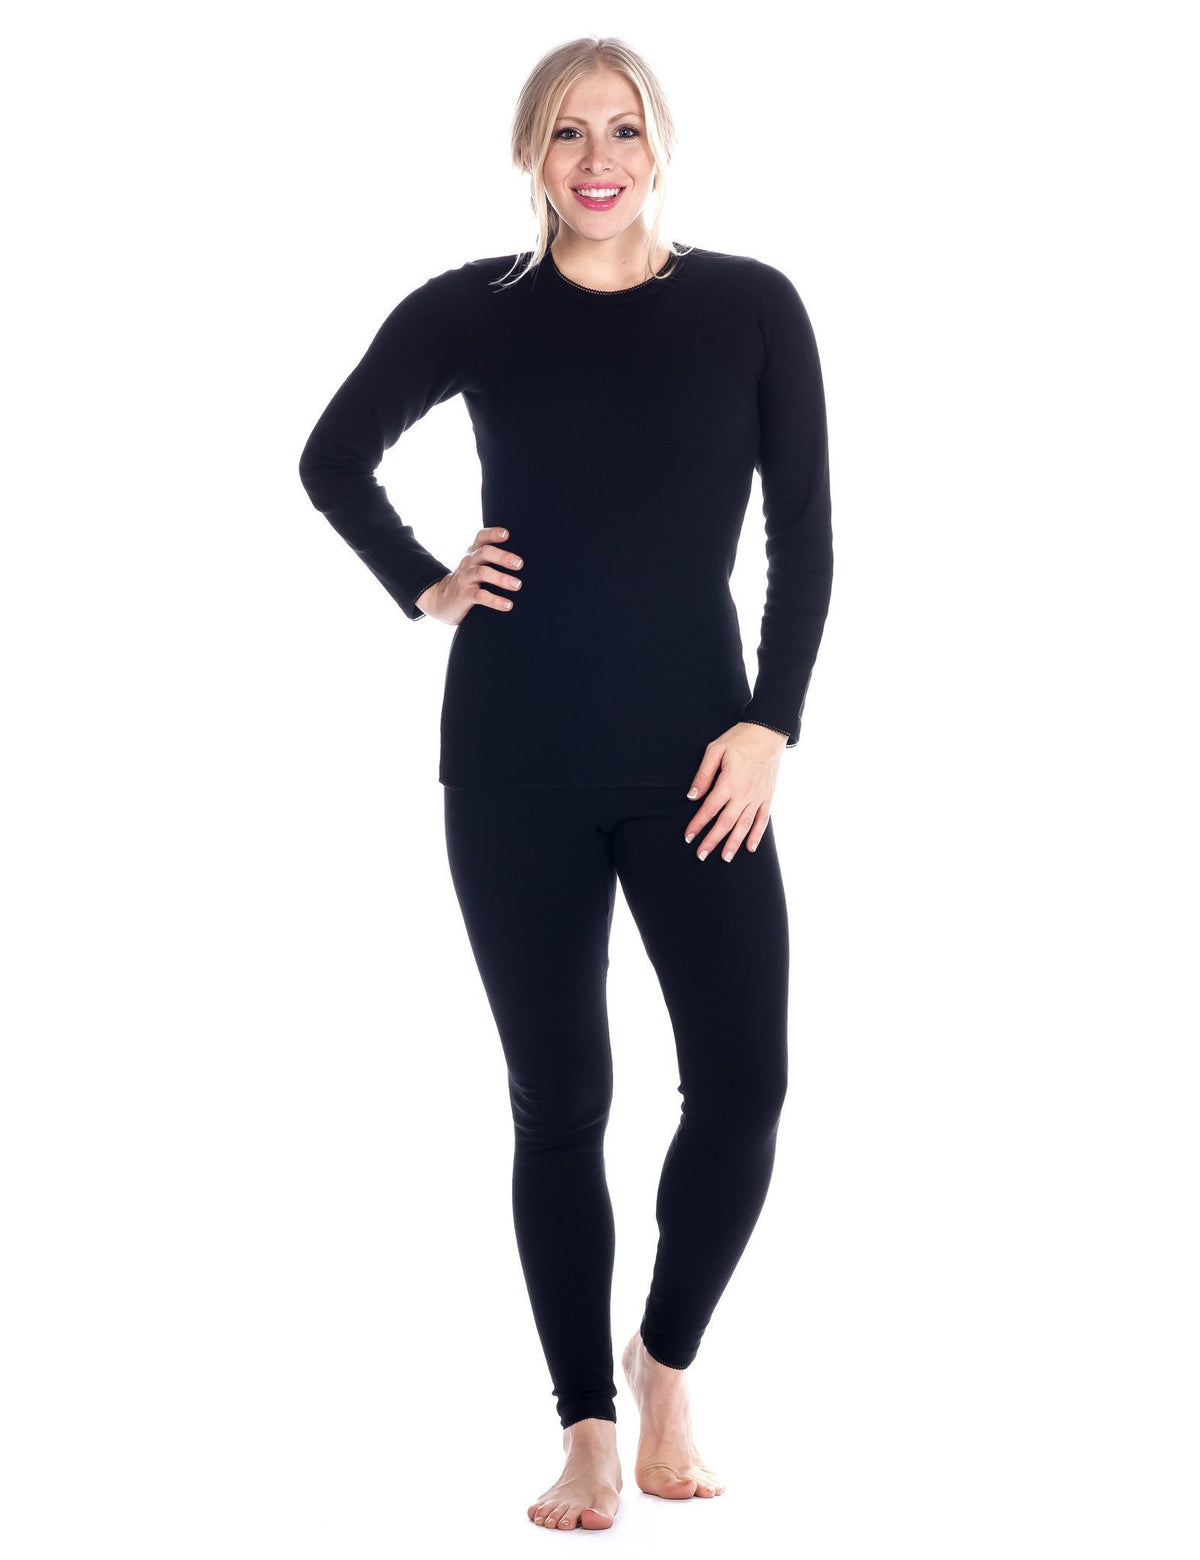 Women's Classic Waffle Knit Thermal Top and Bottom Set - Black